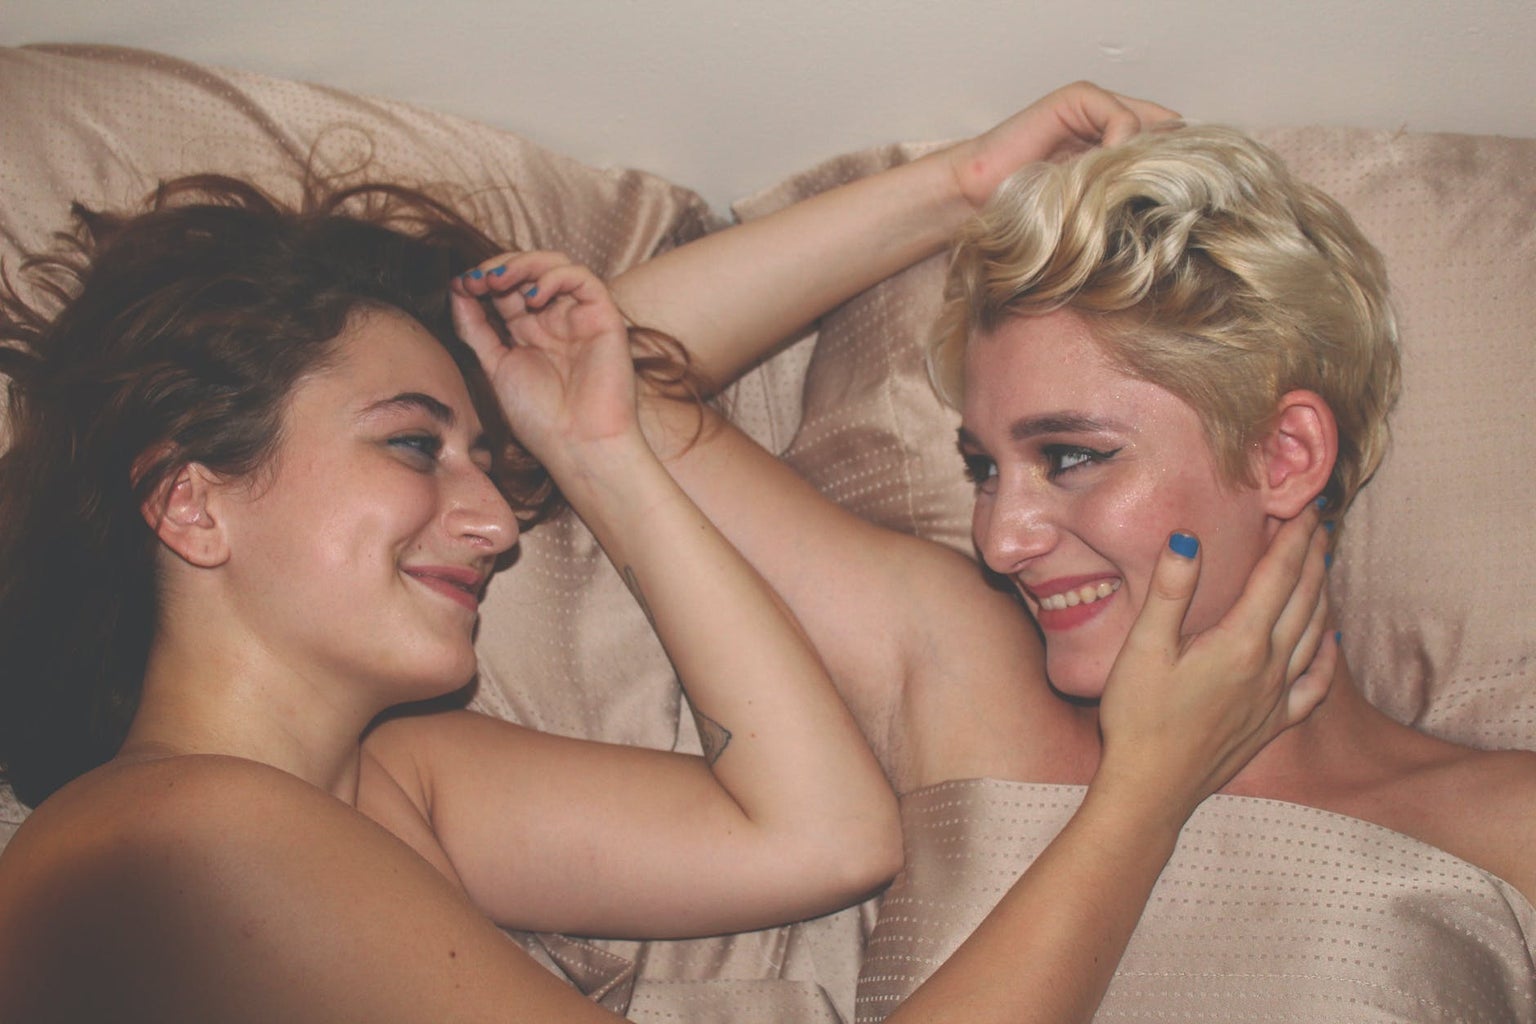 two women smiling at each other while laying in a bed